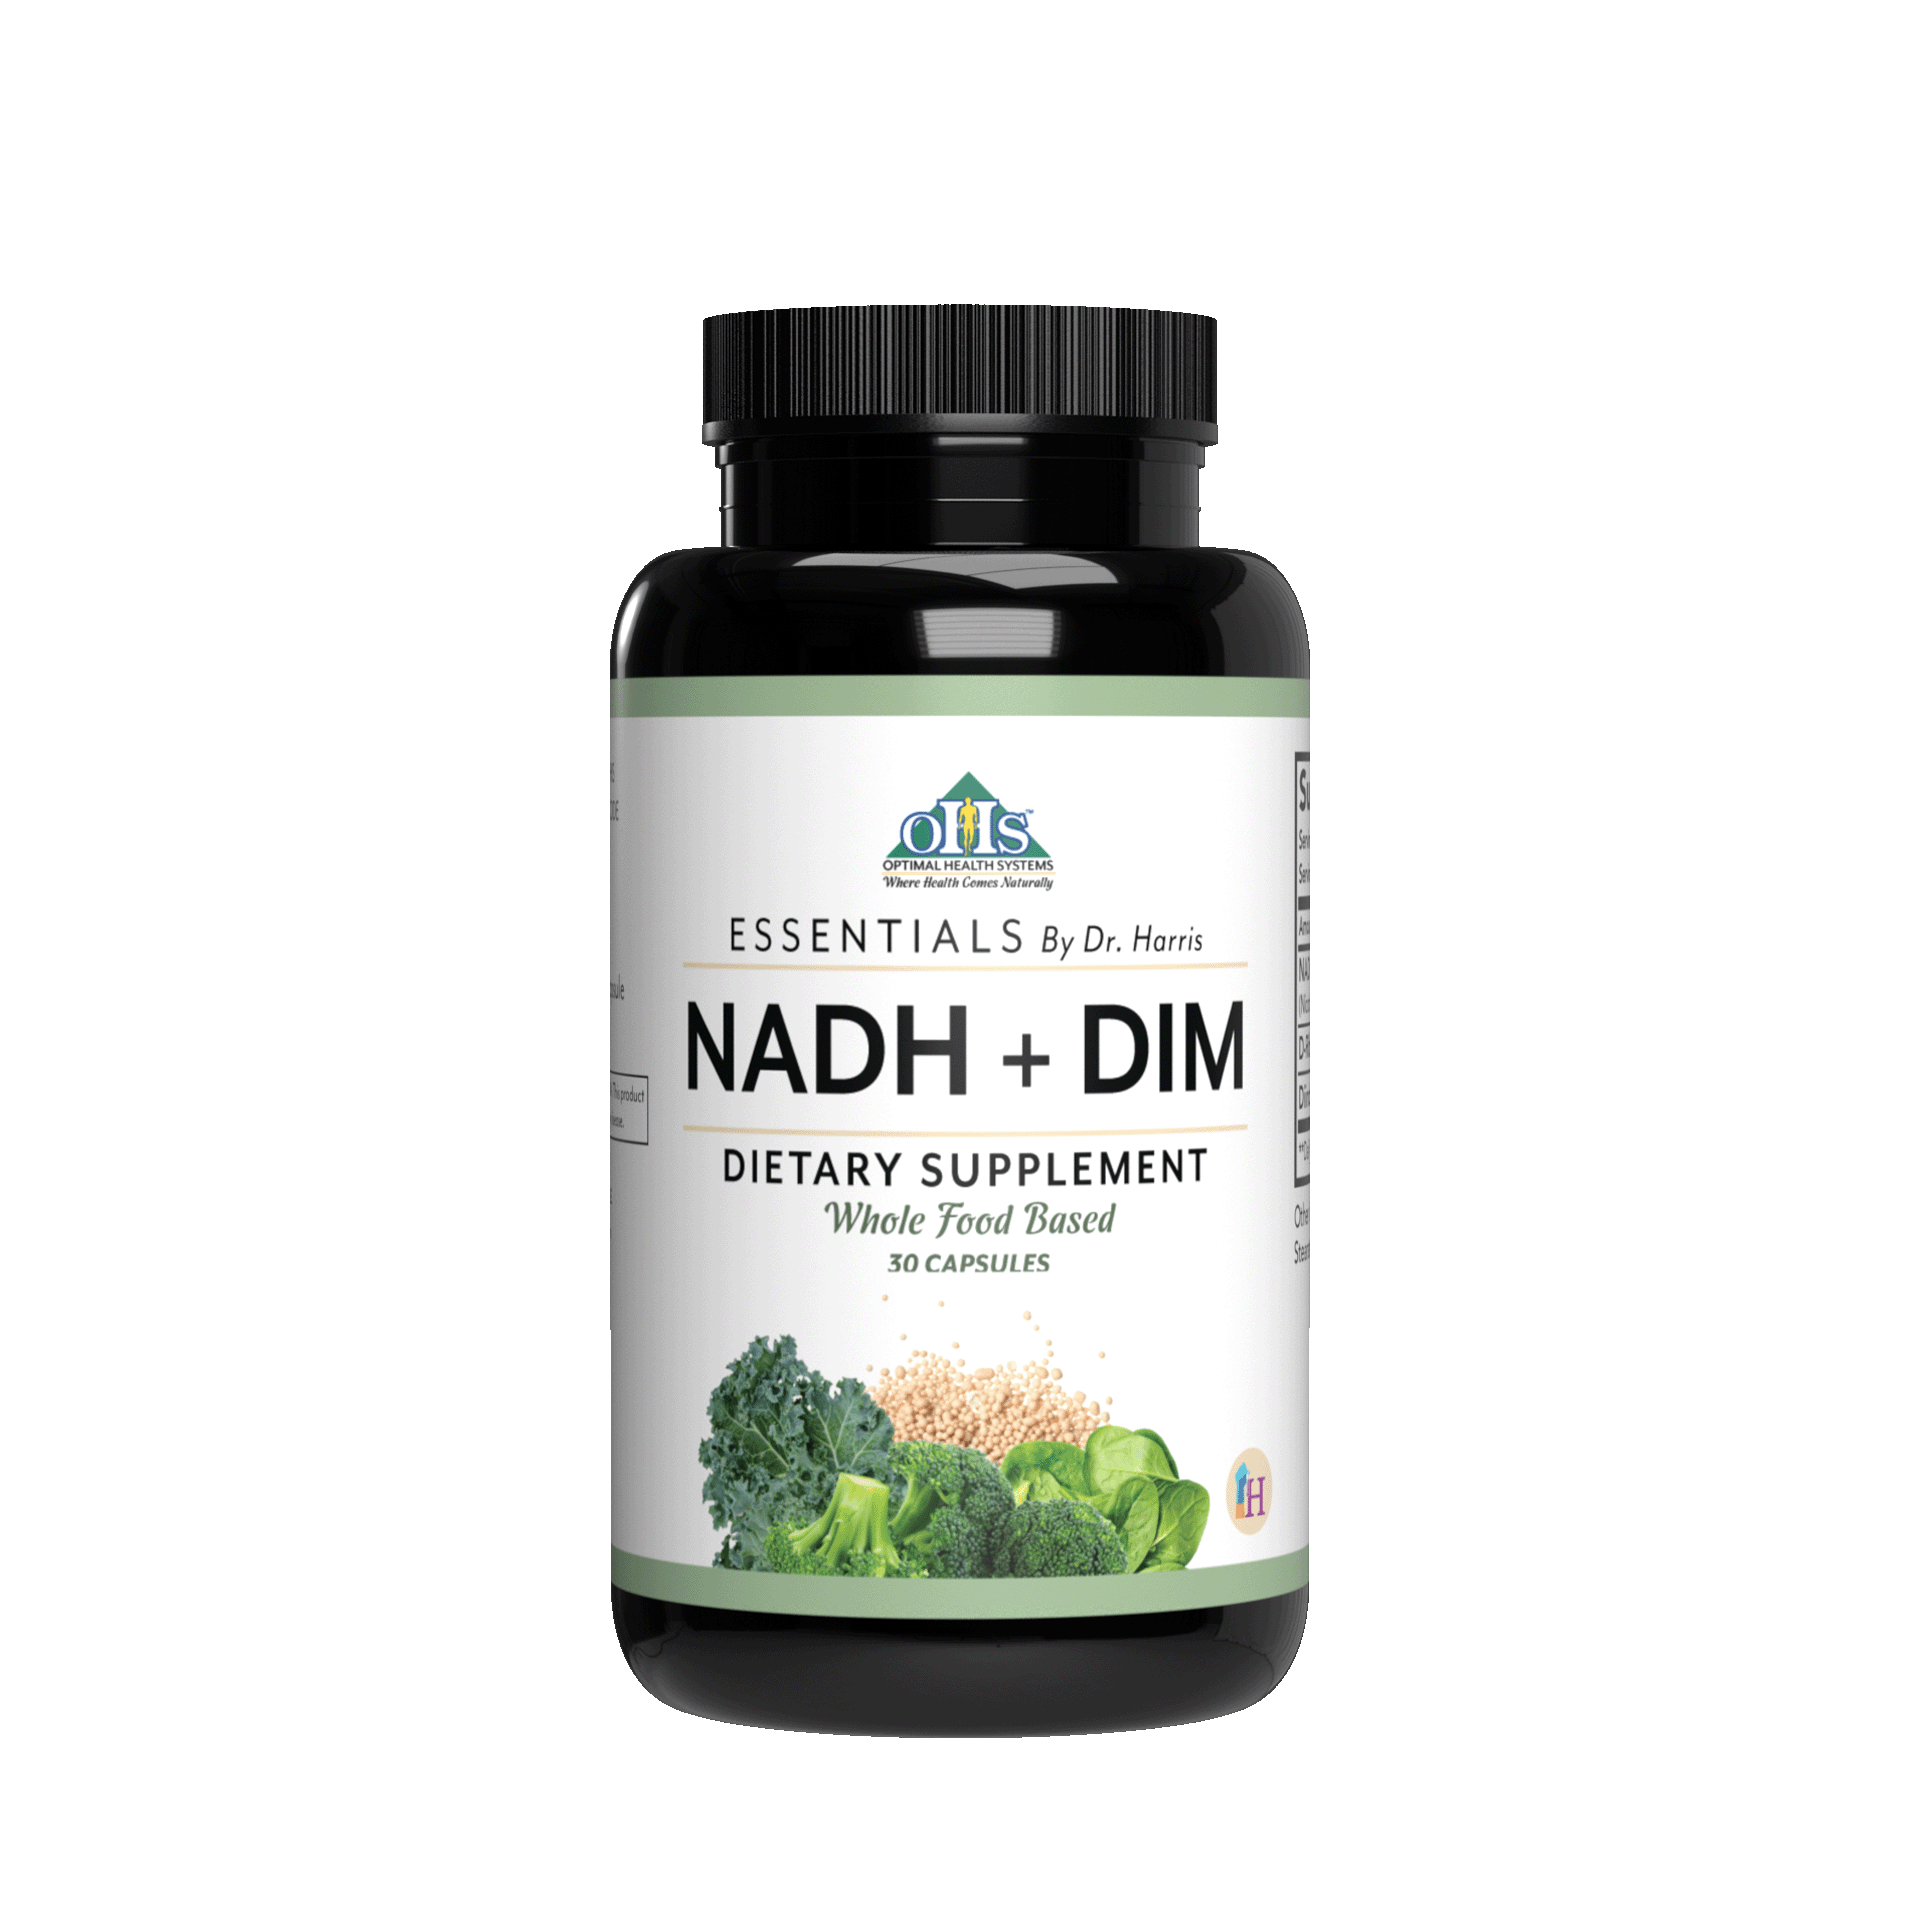 Image of a bottle of Optimal NADH+DIM.